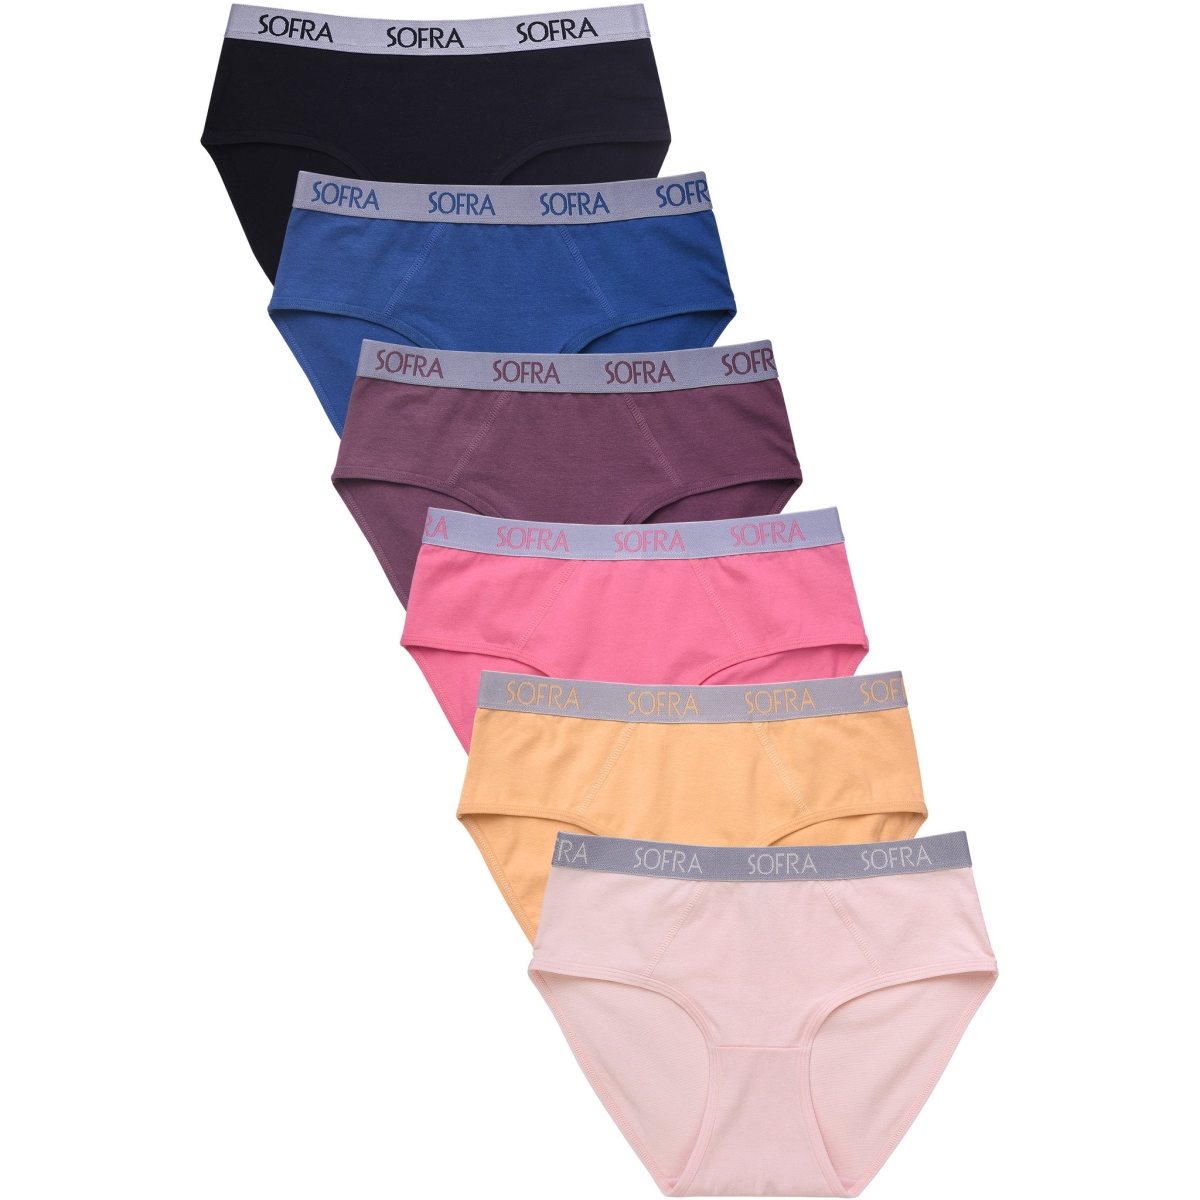 Picture of 247 Frenzy 247-LP1421CKE4-LG Womens Essentials Cotton Stretch Bikini Panty Underwear with Extended Side Seams - Assorted Color - Large - Pack of 6